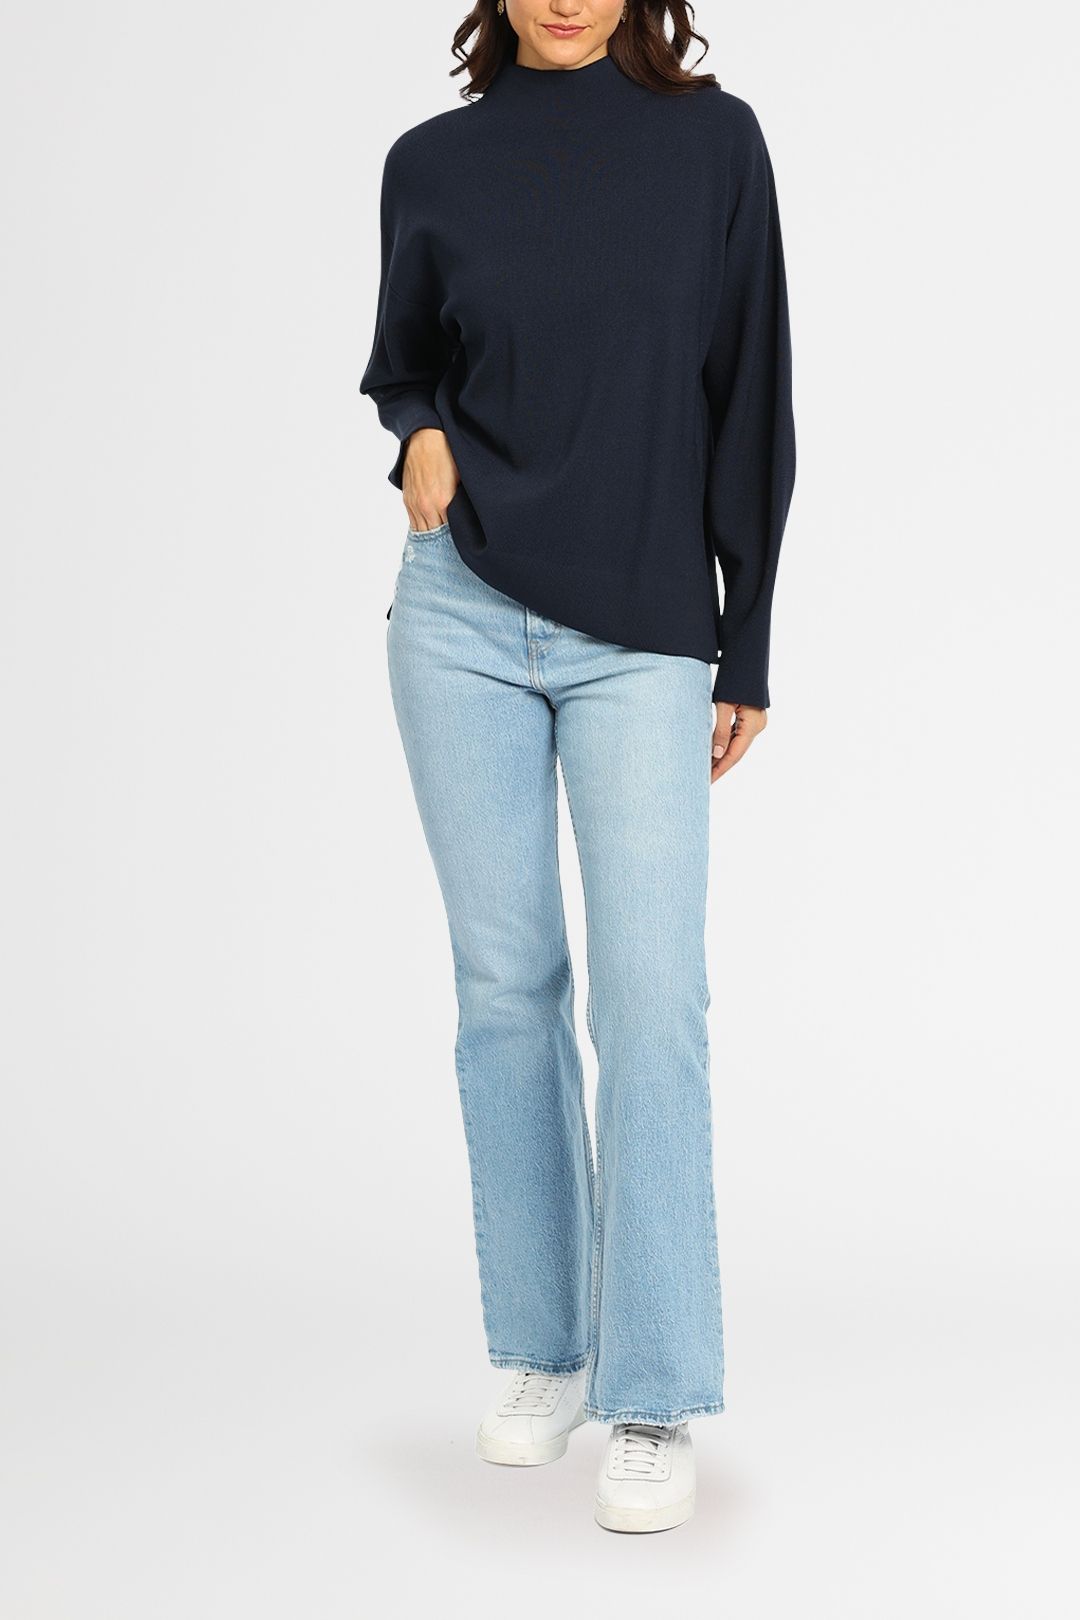 Camilla and Marc Amana Knit Top - Navy slit